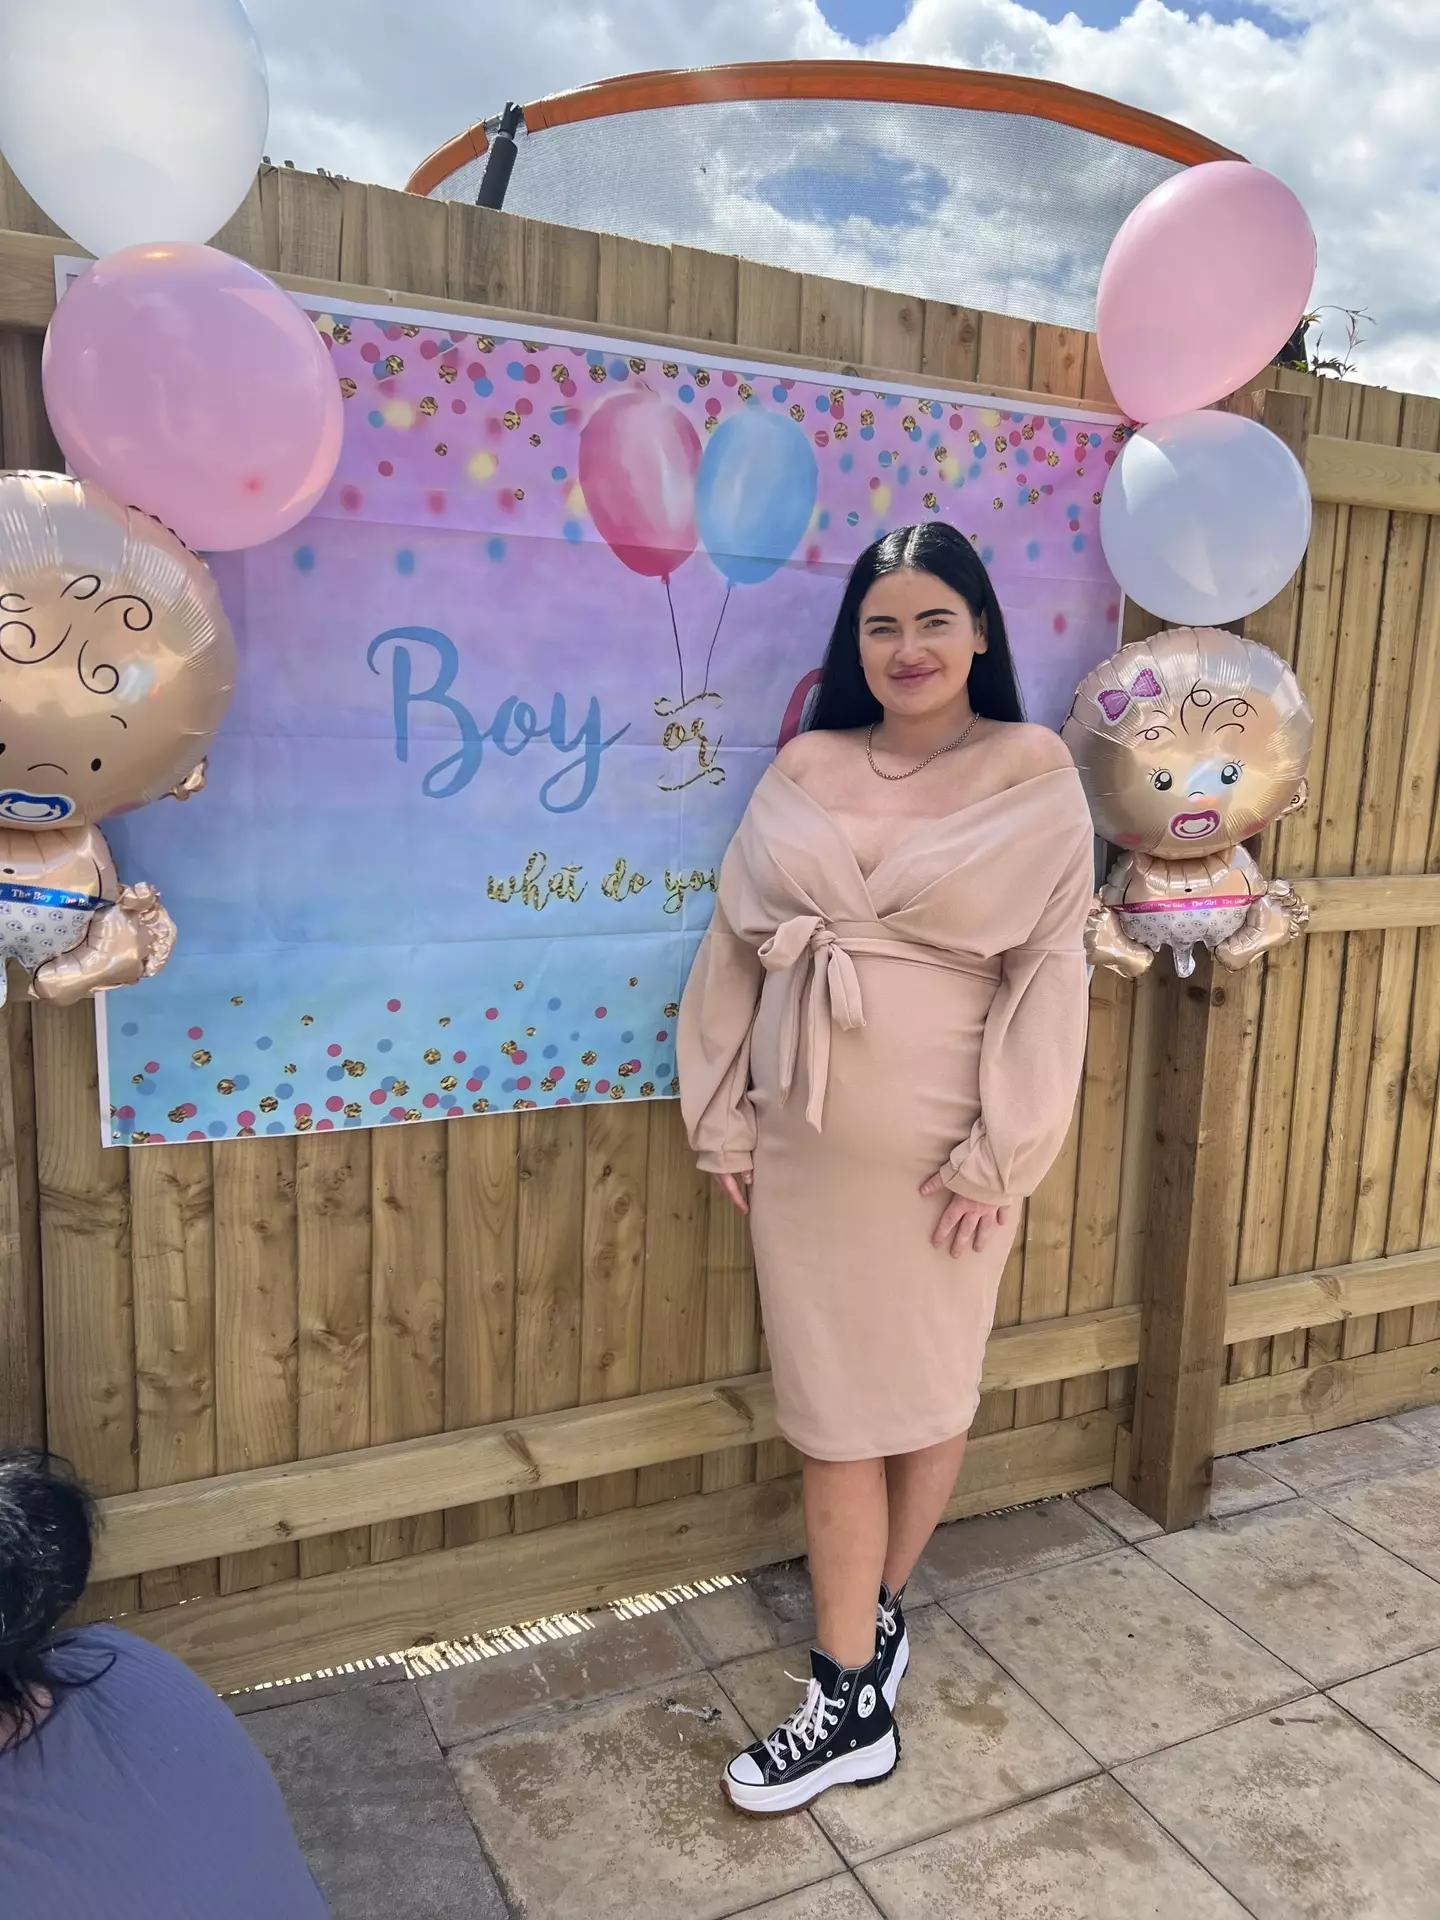 Mandy Morgan-Smith's gender reveal party descended into chaos after a smoke bomb engulfed her back garden (